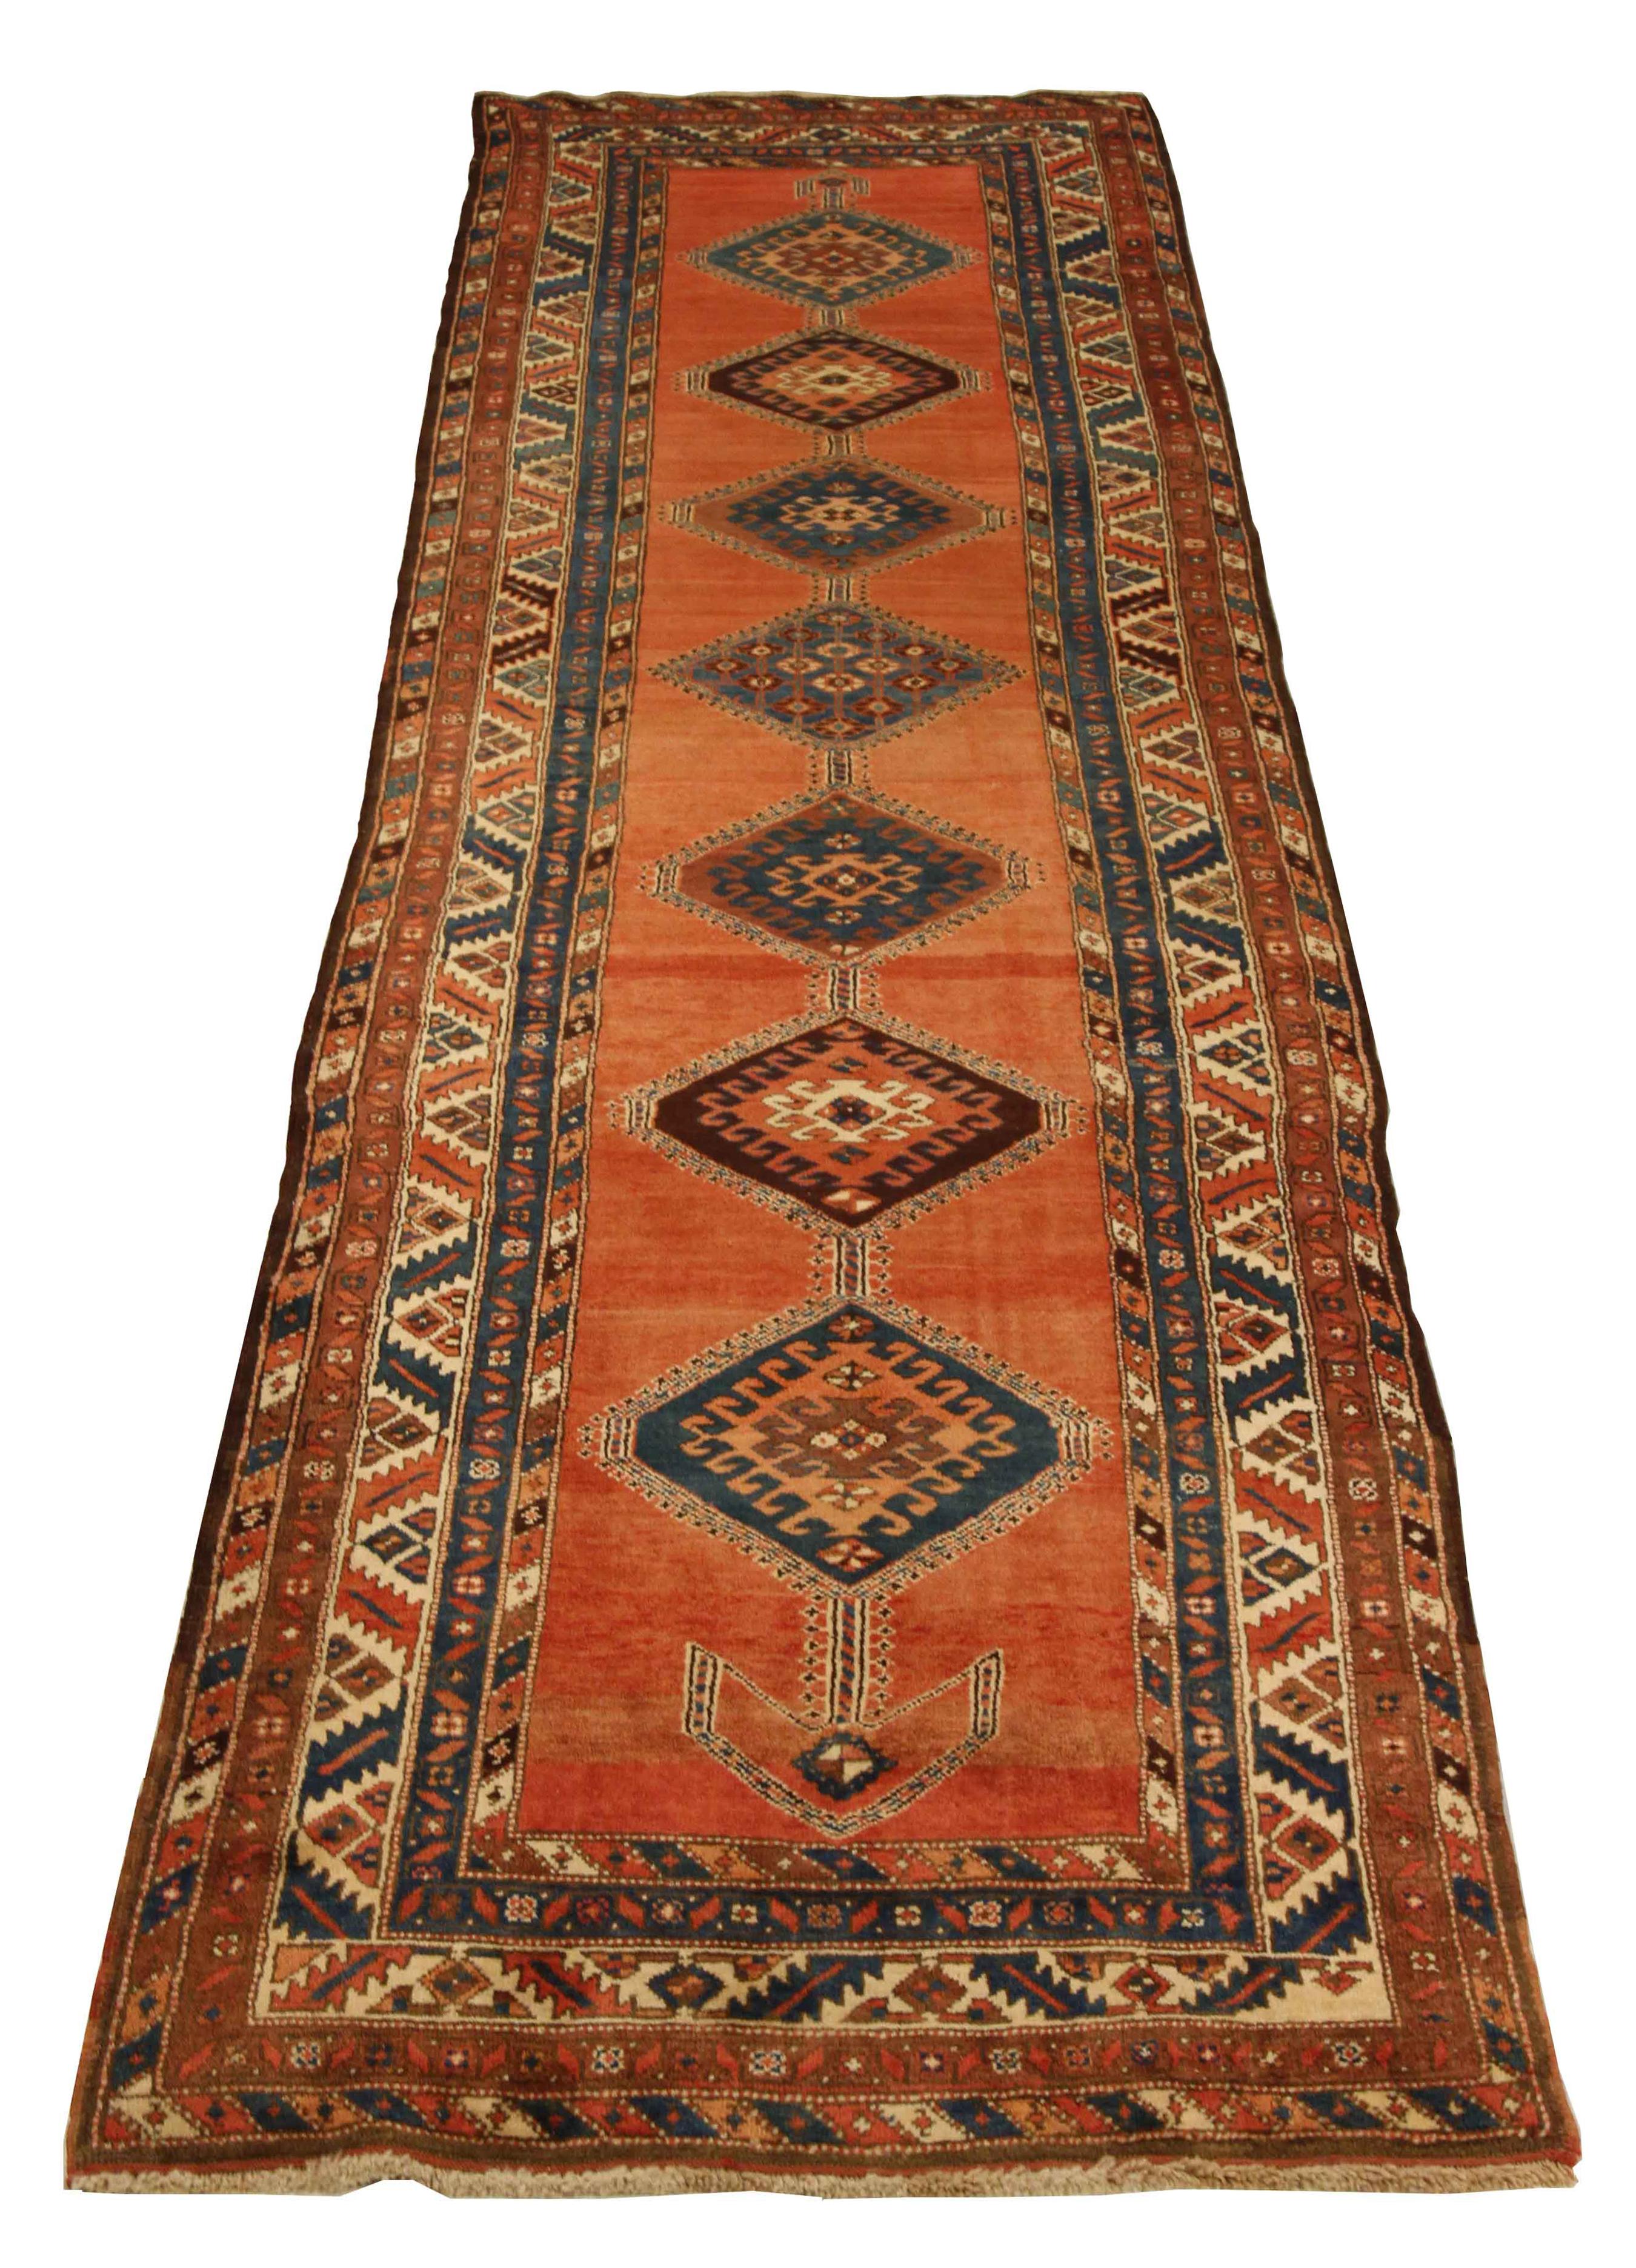 Antique Persian runner rug handwoven from the finest sheep’s wool. It’s colored with all-natural vegetable dyes that are safe for humans and pets. It’s a traditional Heriz design handwoven by expert artisans.It’s a lovely runner rug that can be